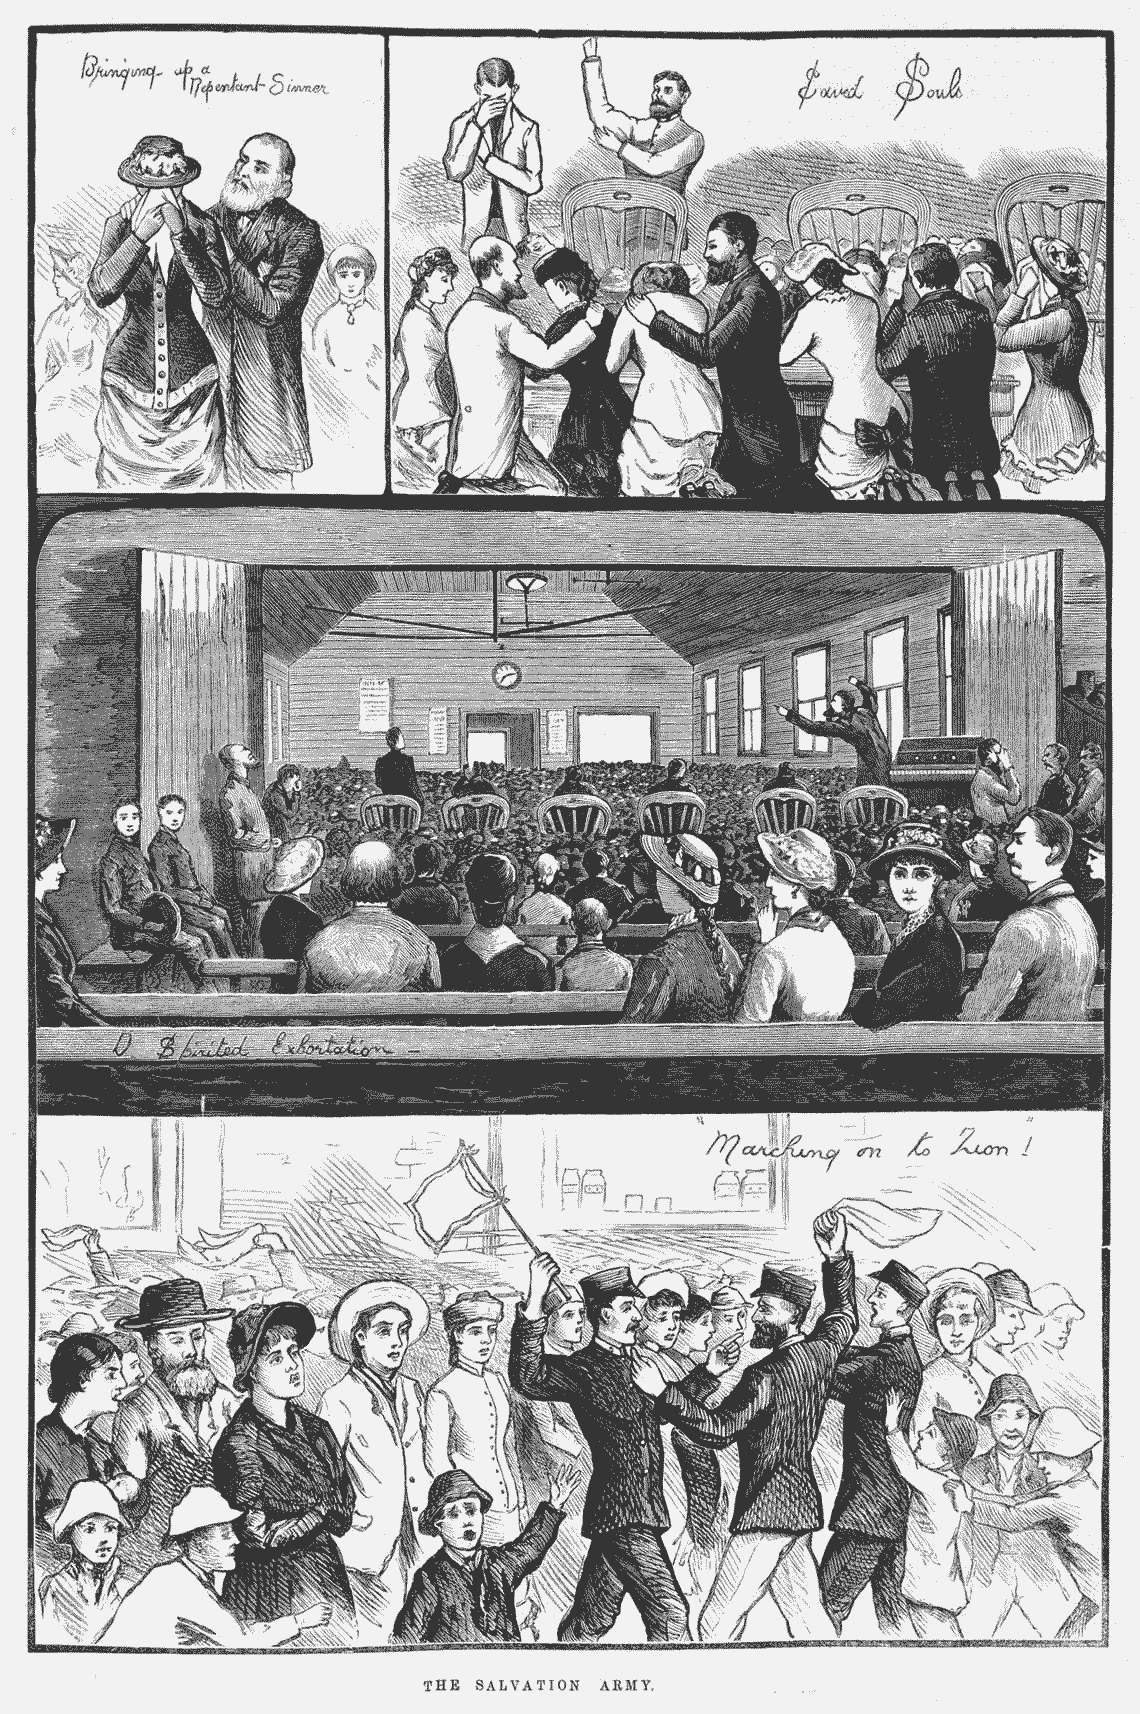 Series of illustrations showing the Salvation Army in Action